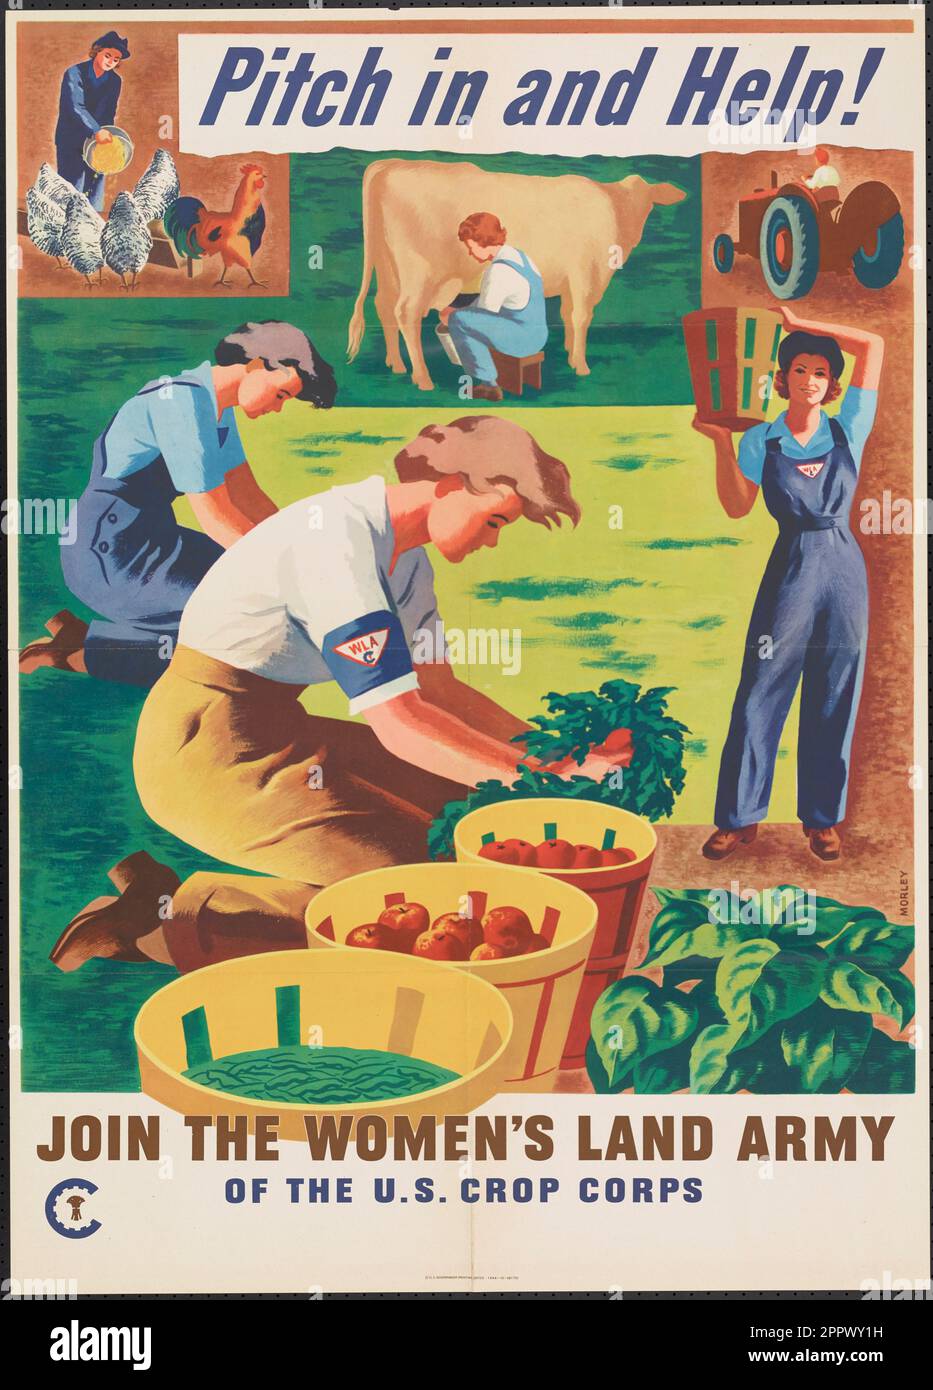 Pitch in and help! join the Women's Land Army of the U.S. Crop Corps by Morley, Hubert Publication date 1944 Stock Photo